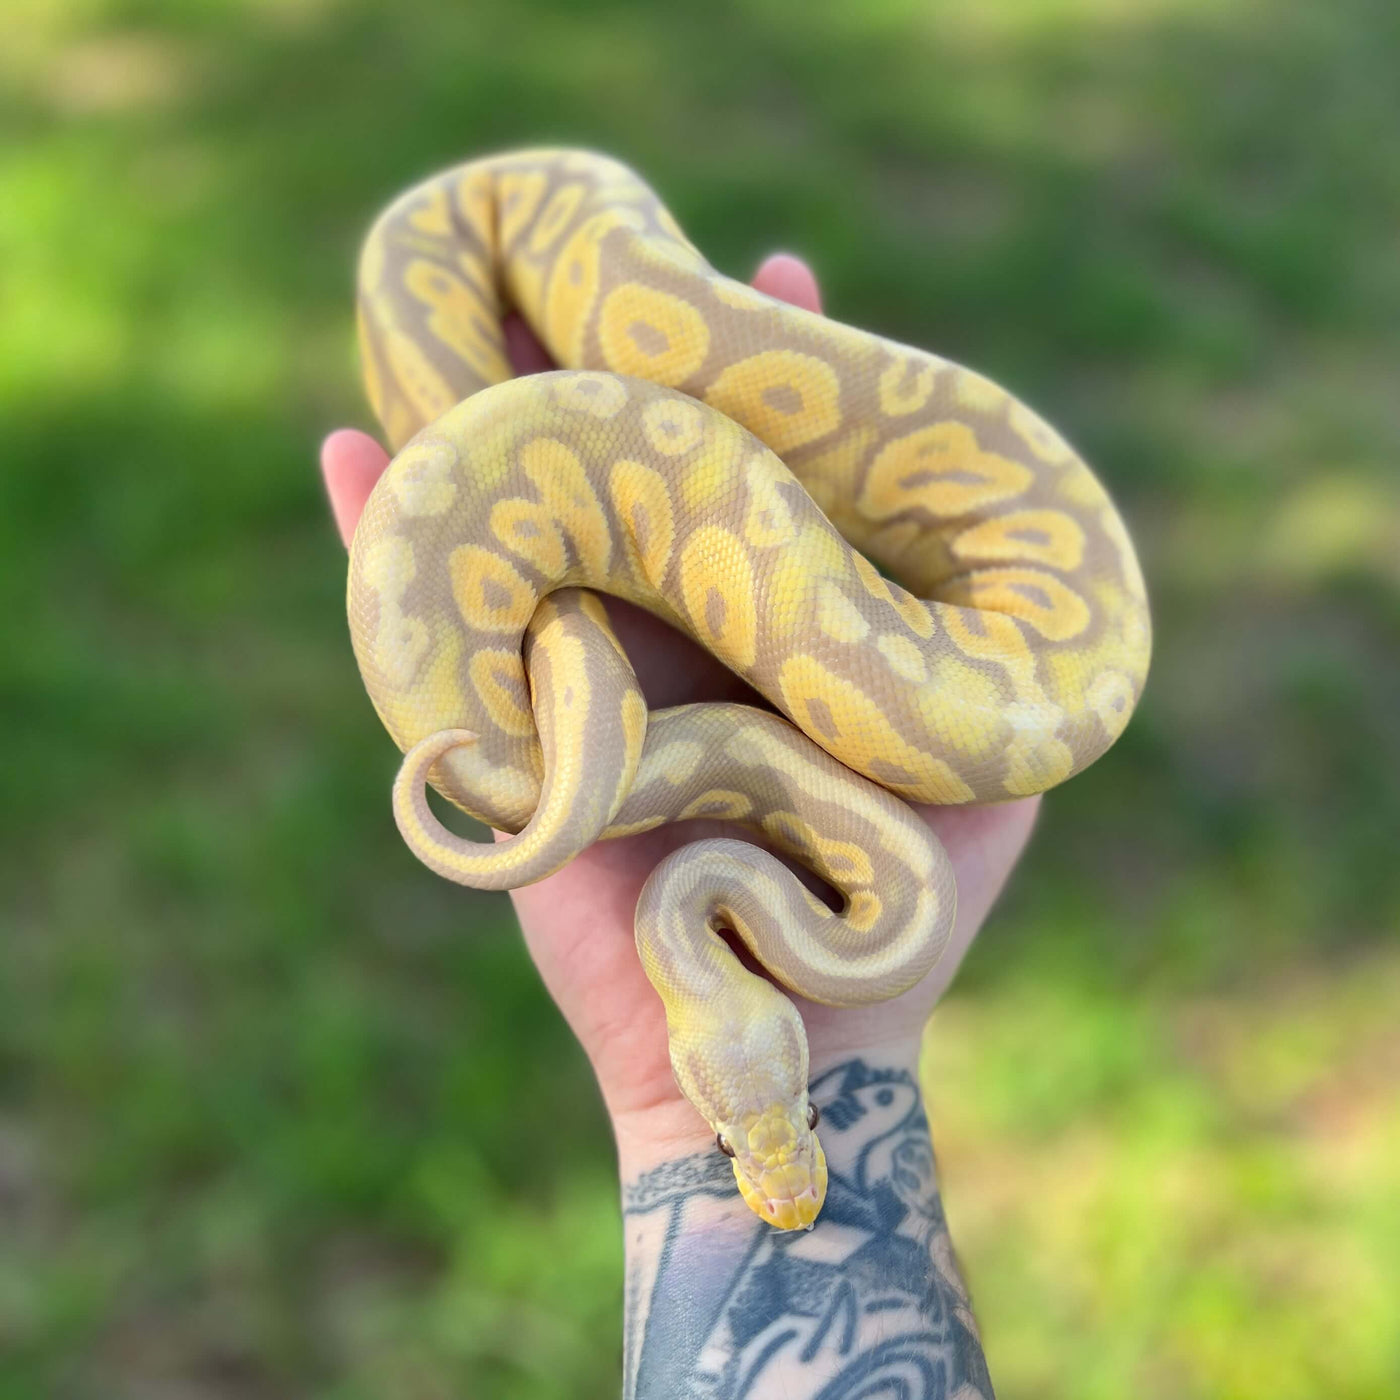 candy pewter ball python for sale online at cheap prices, buy ball pythons near me